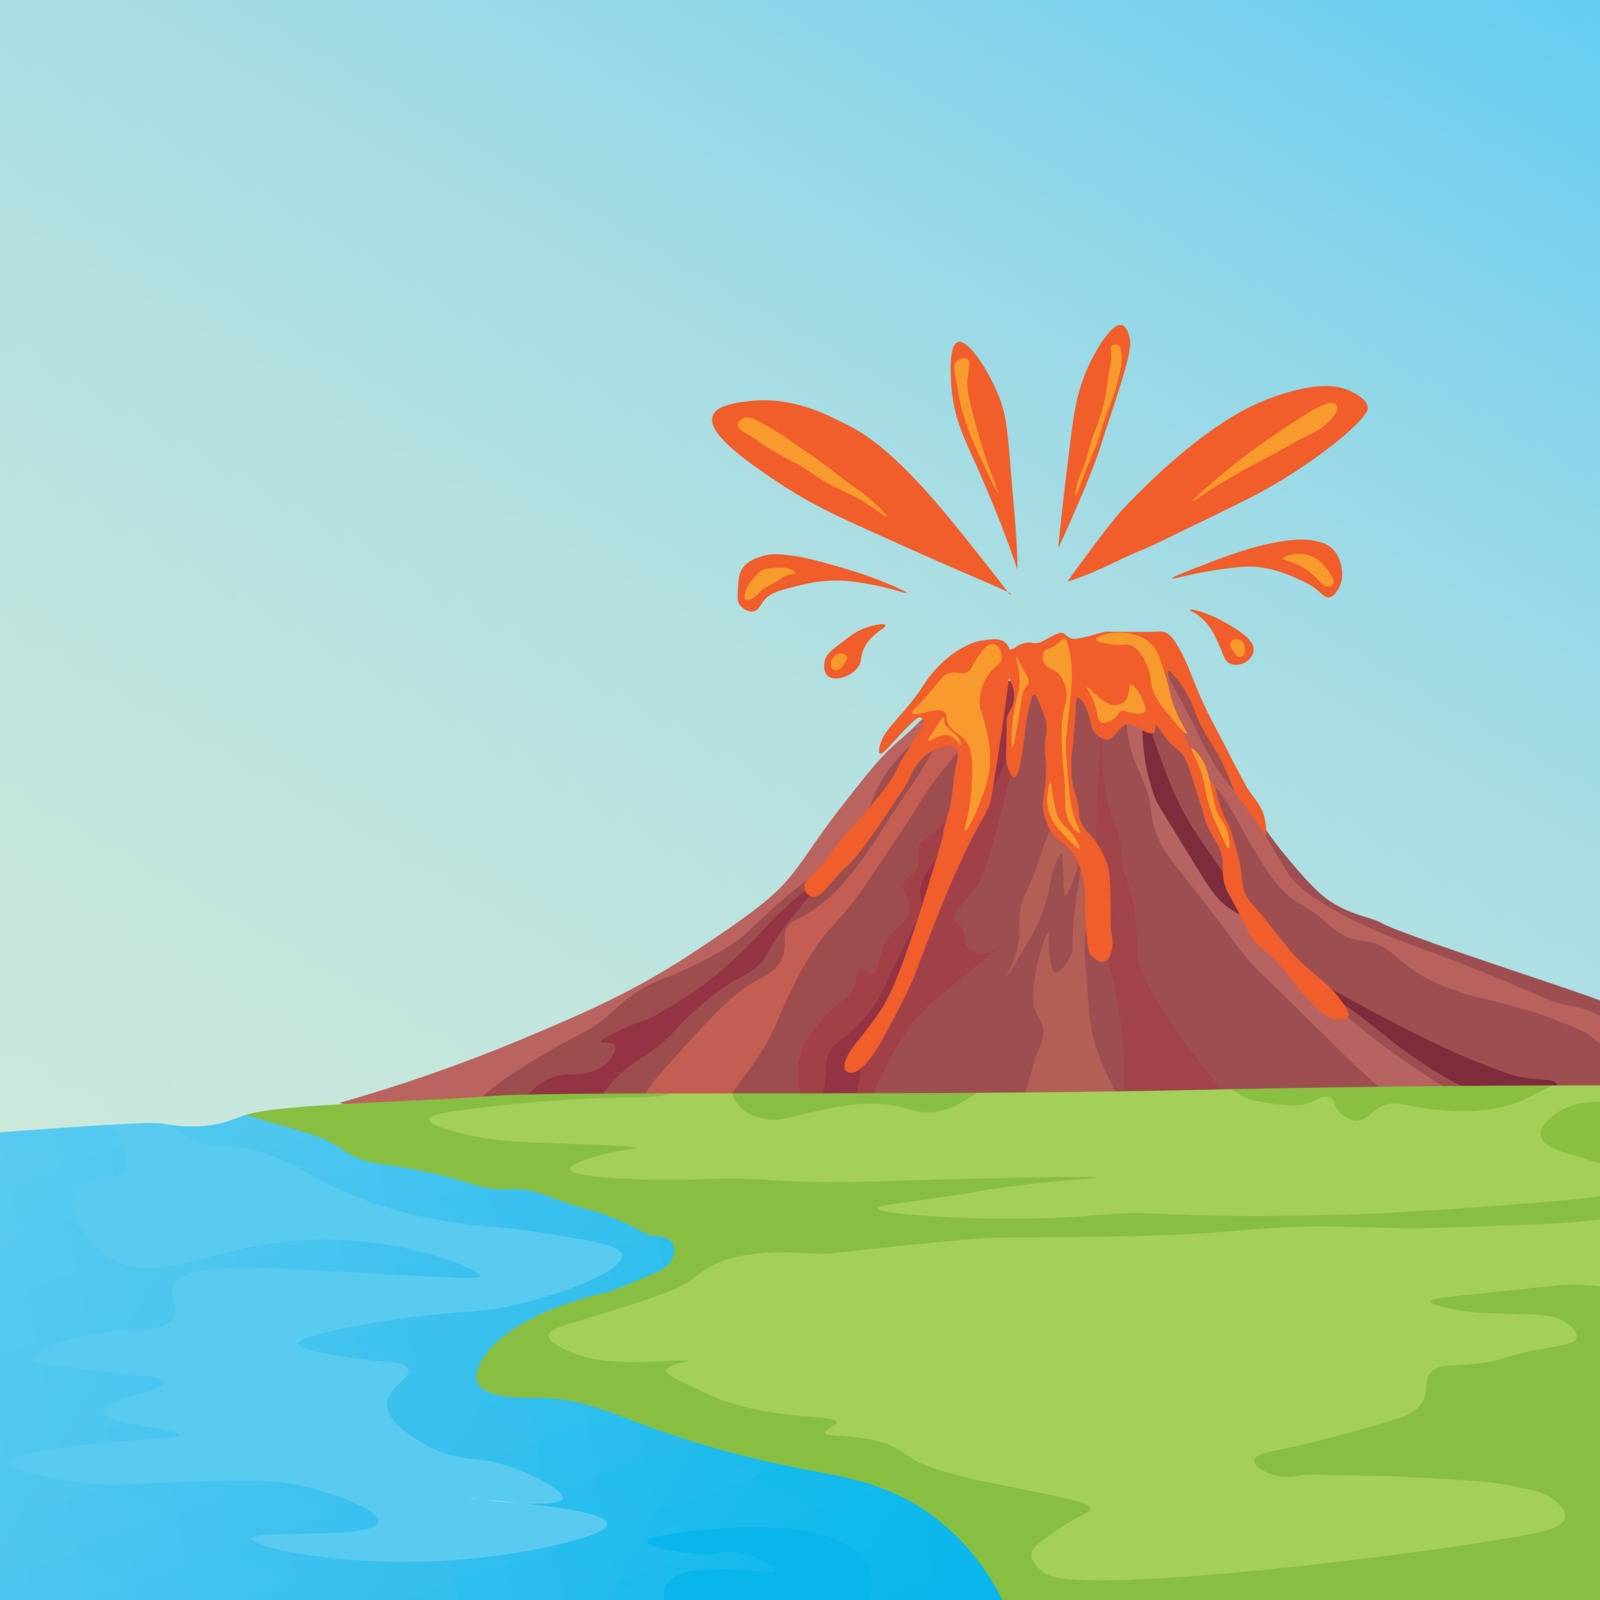 Tropical island in ocean with palm trees and volcano. by vaseninadaria